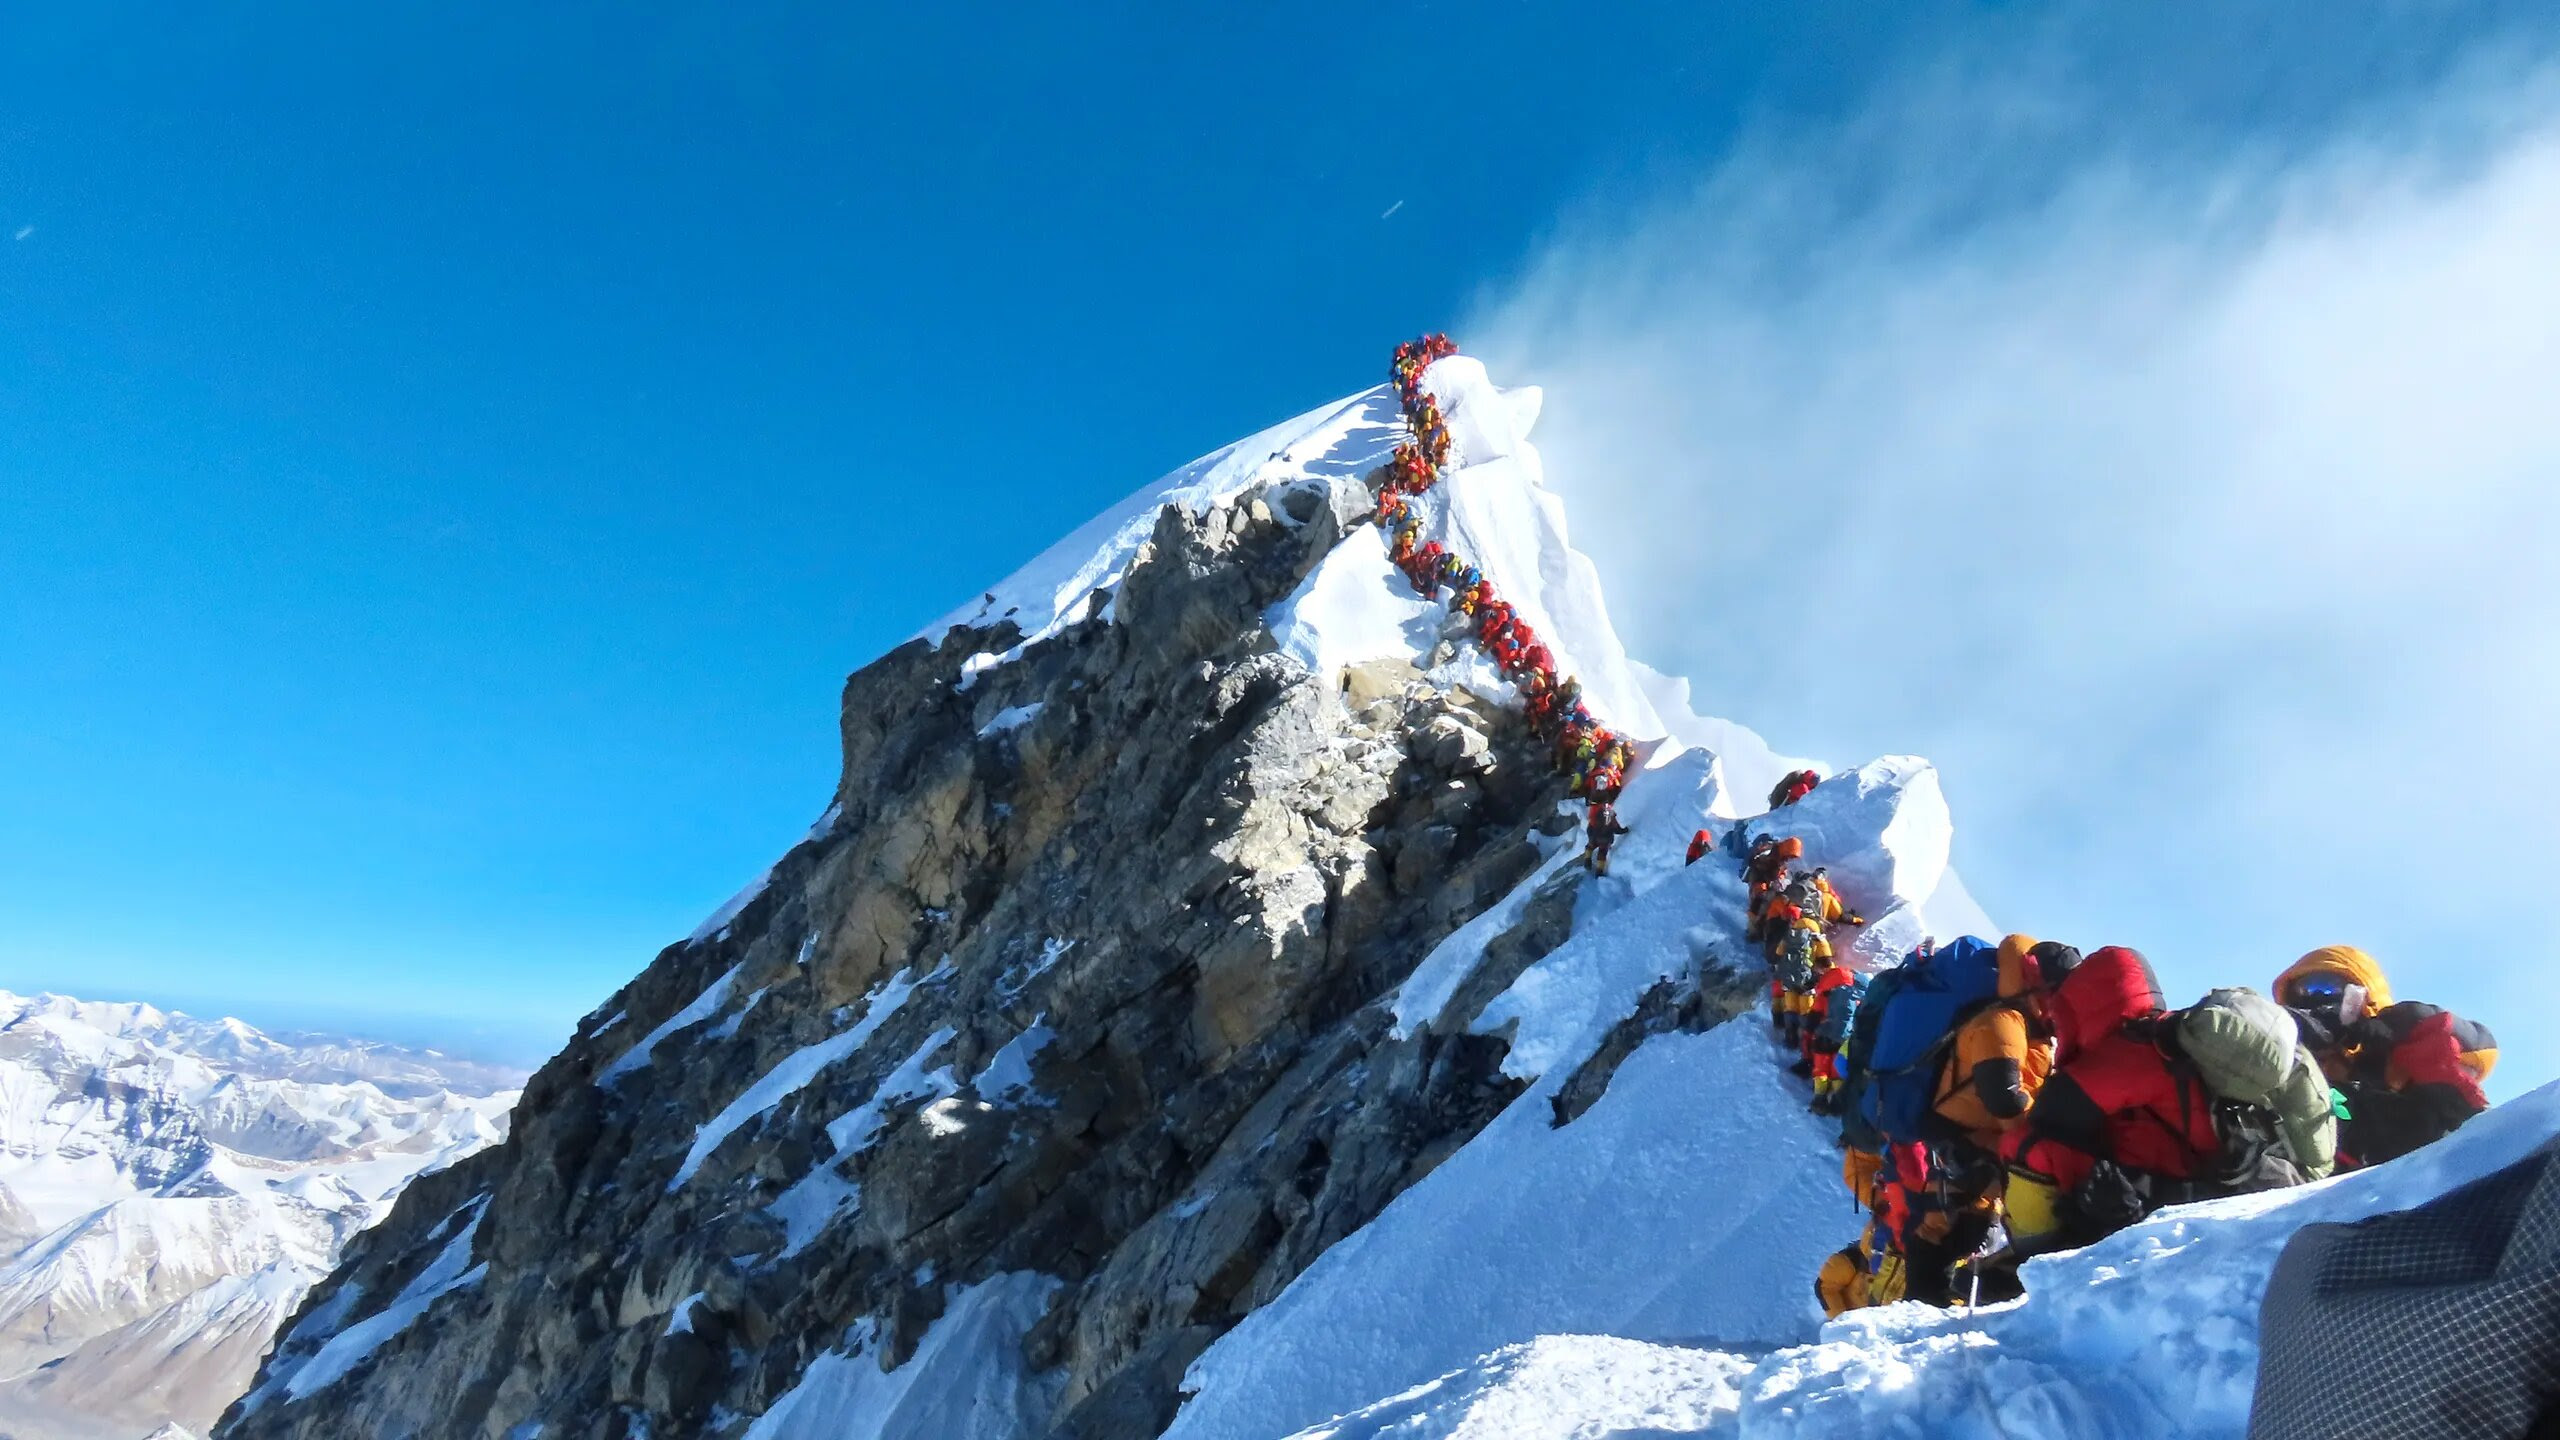 Viral photograph showing a very long line of people waiting to reach Mt Everest's summit